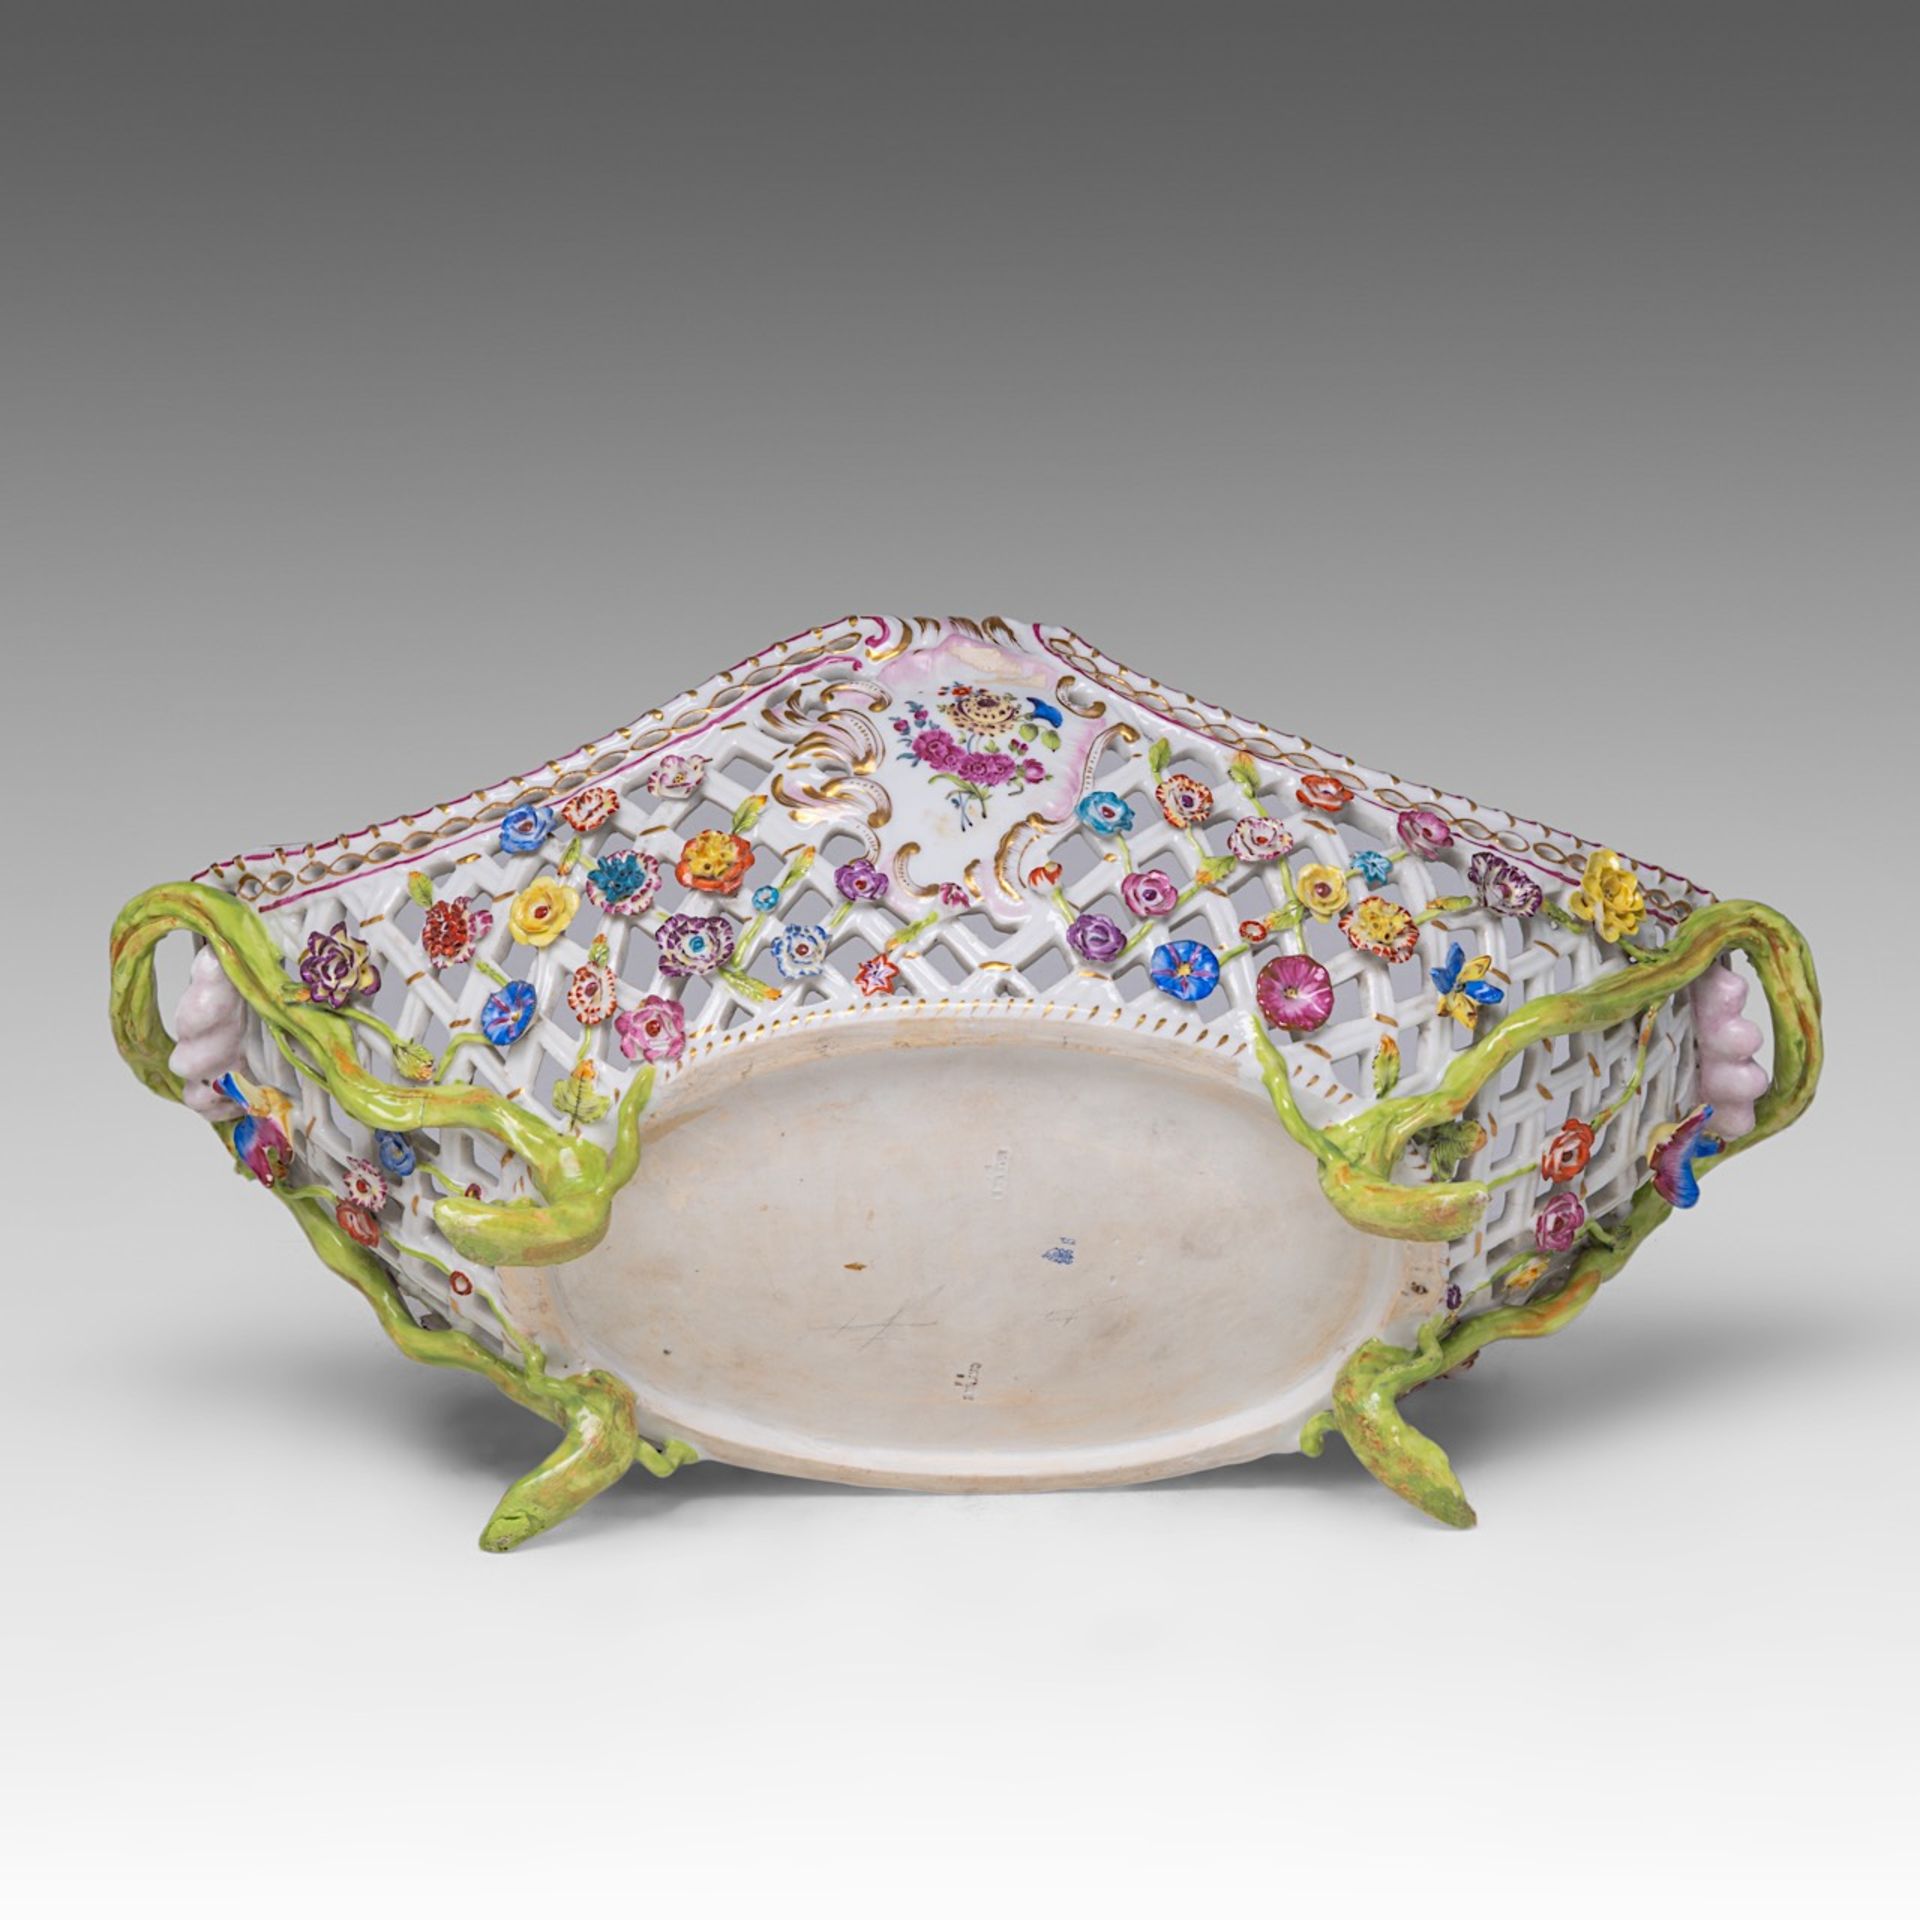 A polychrome Saxony porcelain basket on stand, decorated with modelled birds and flowers, H 33 - W 4 - Image 11 of 12